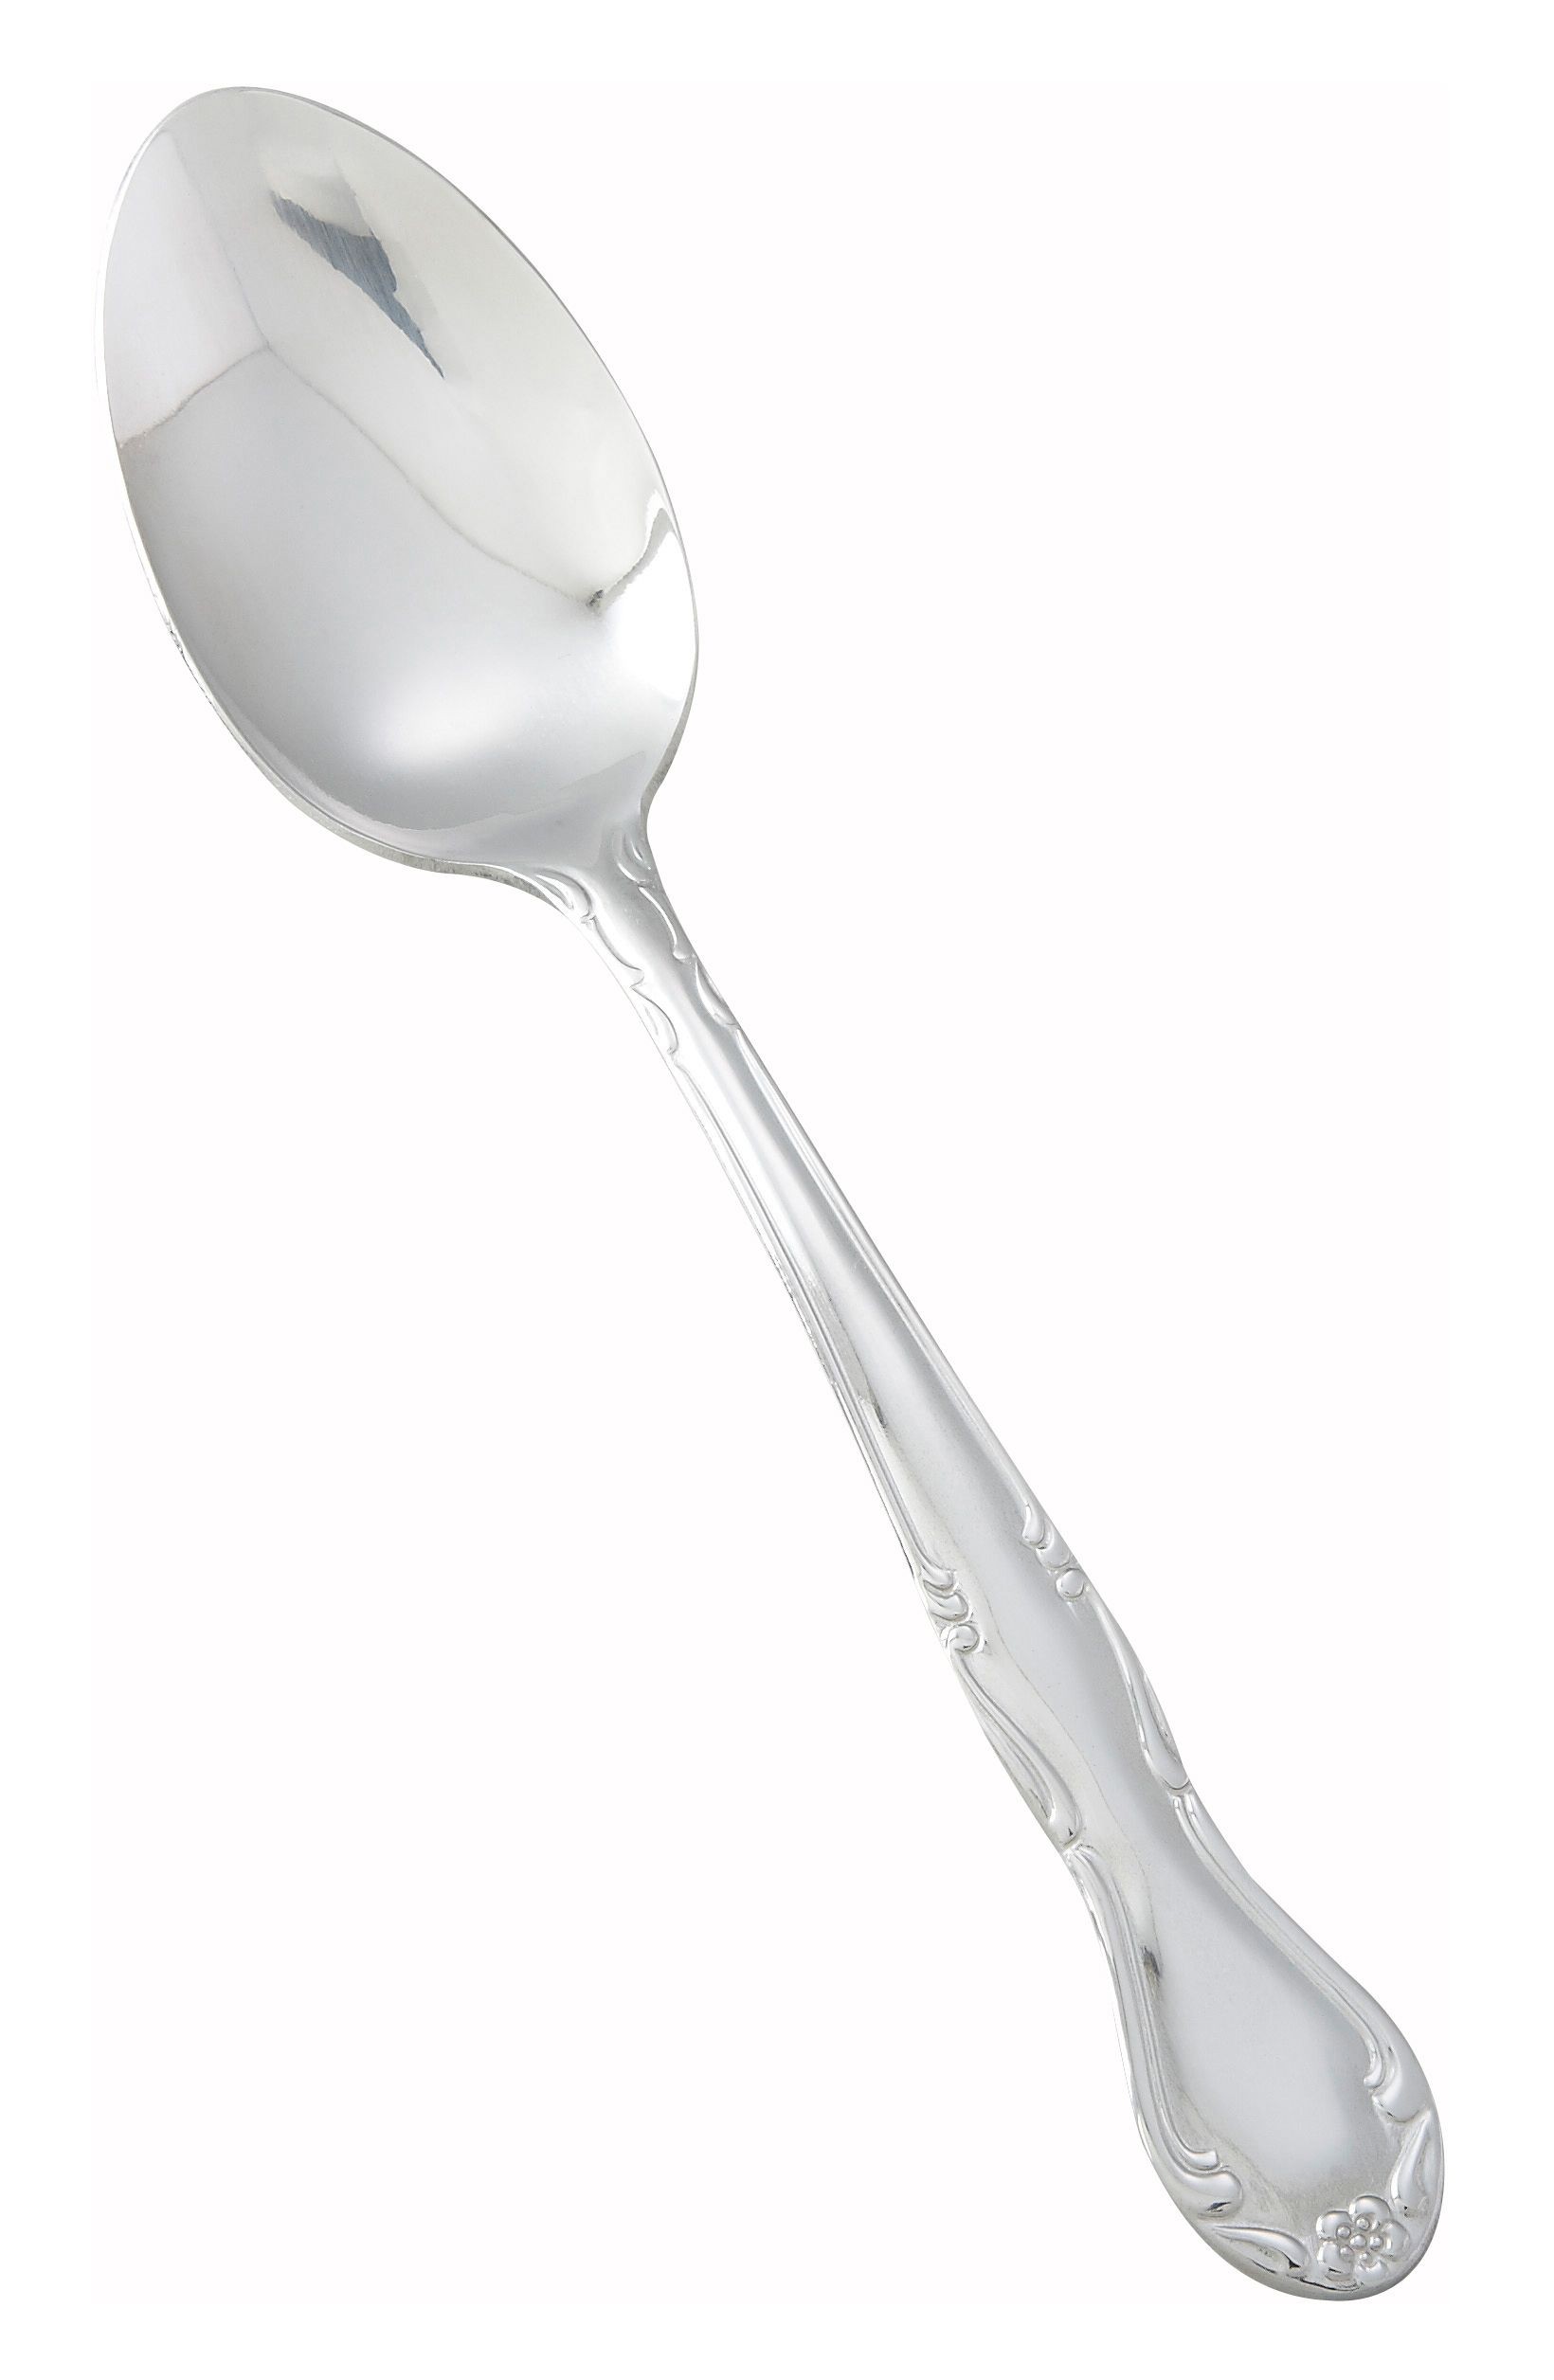 Winco 0024-03 Elegance Plus Heavy Weight Mirror Finish Stainless Dinner Spoon (12/Pack)